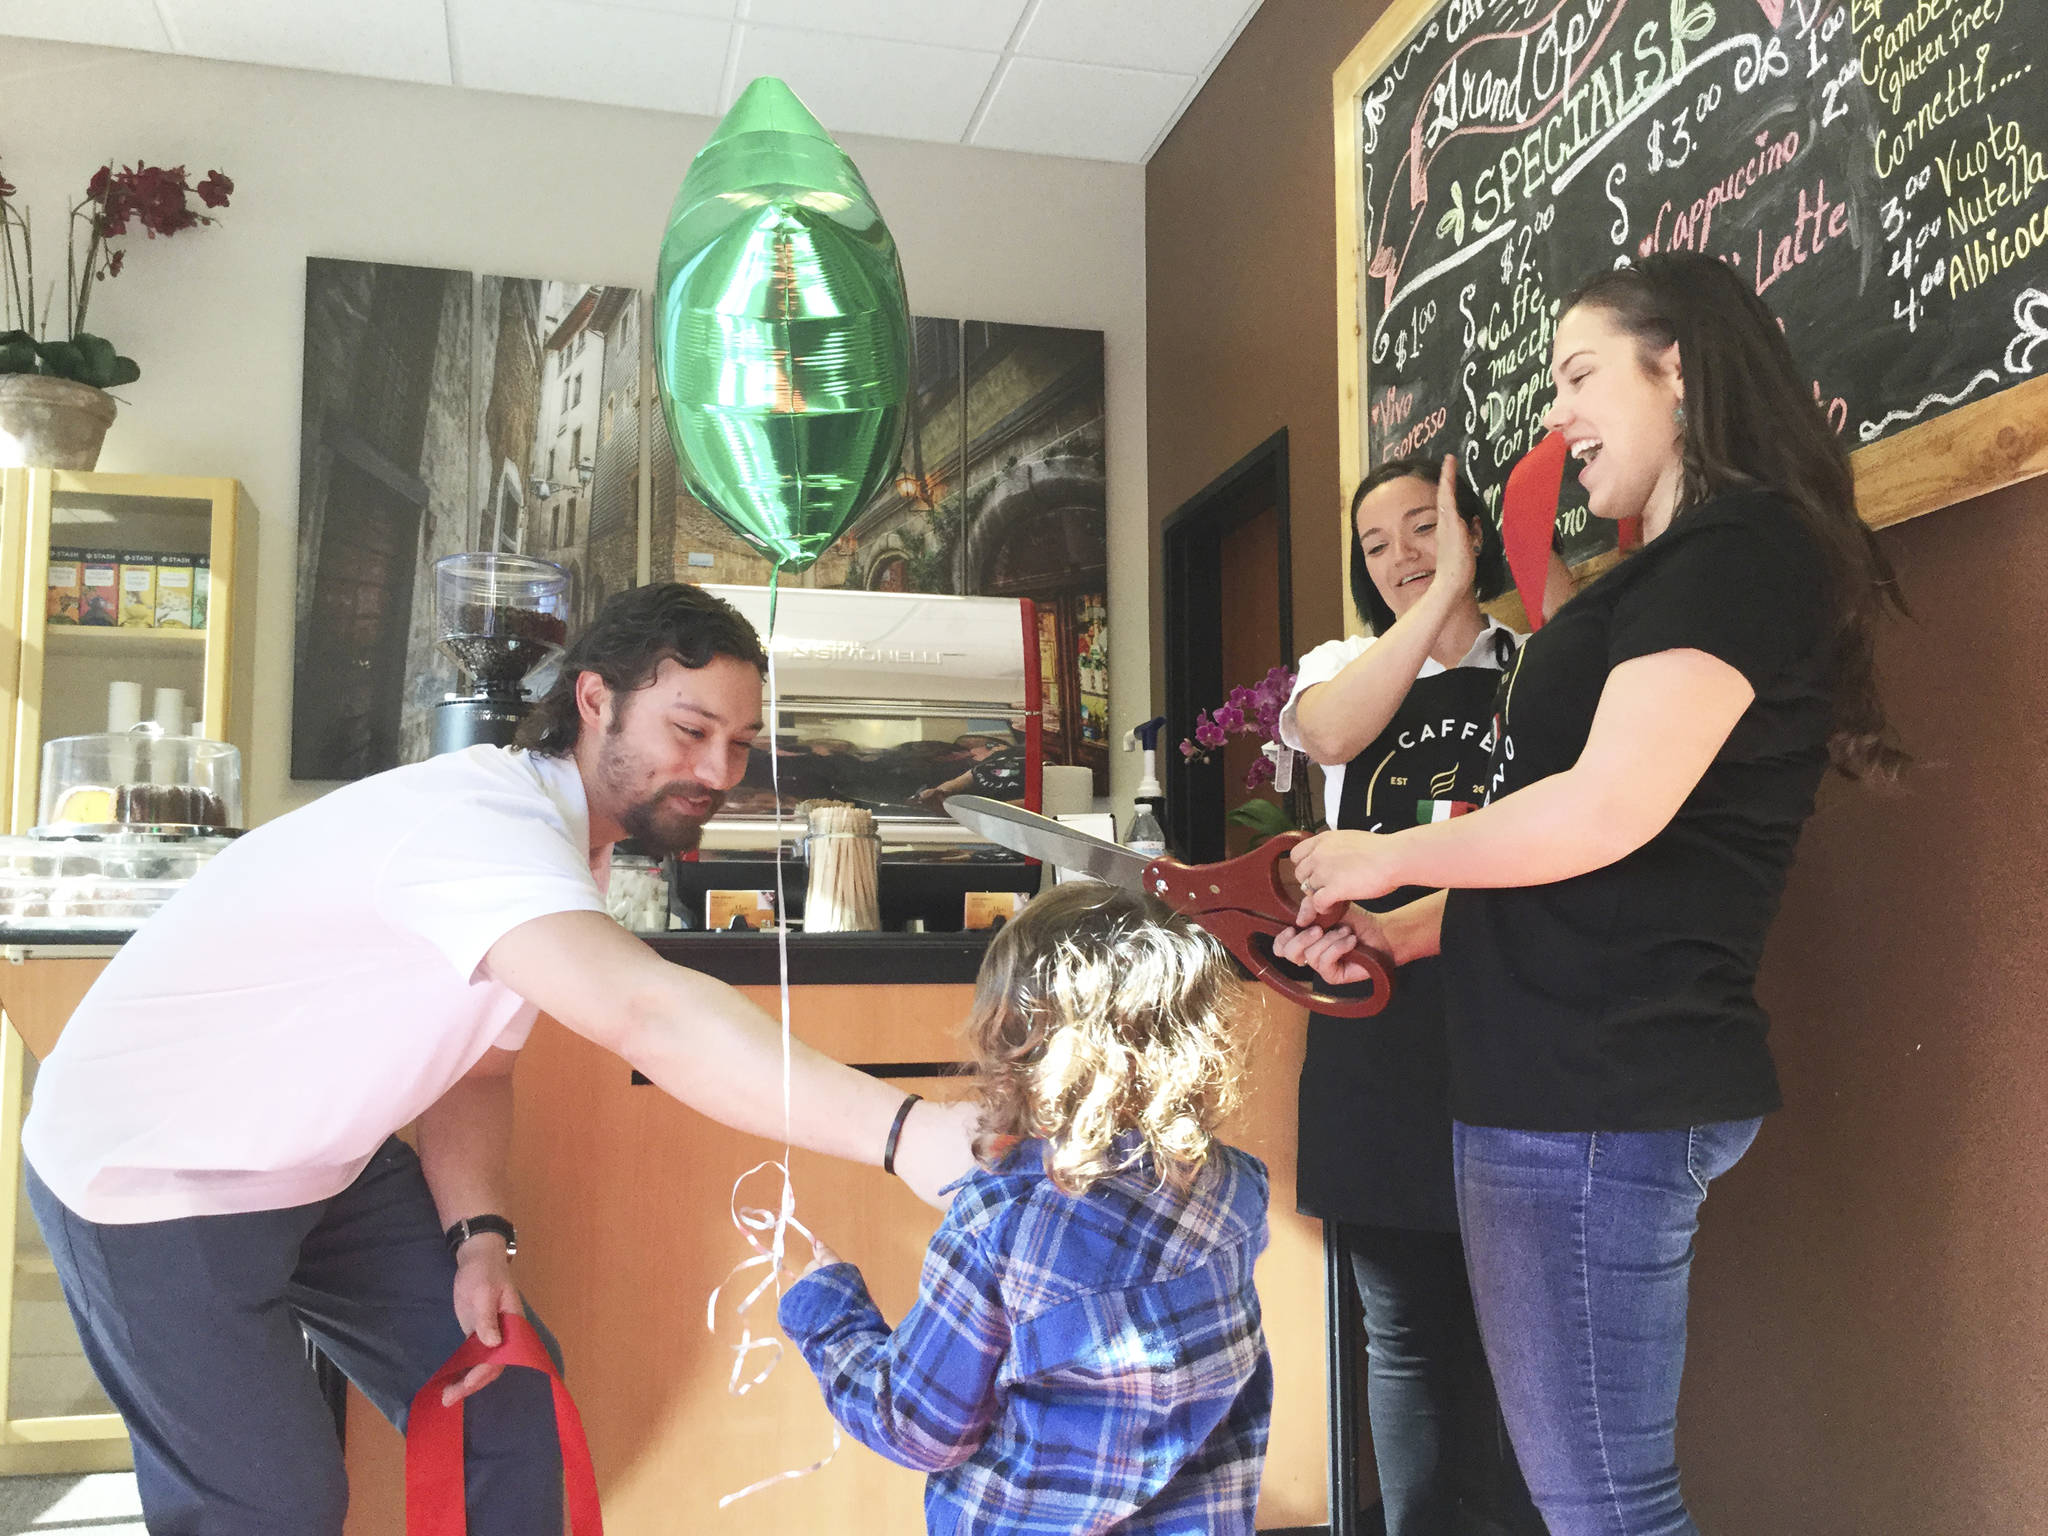 Antonio and Kiersten Baiamonte had a little help from their three-year-old son, Giacomo, celebrating the grand opening of Caffe Italiano, their new business located in the Stilly Valley Collective at 103 E. 3rd St. in Arlington. The Baimontes already have office space in the building for their Bio-Monte Tours of Italy.